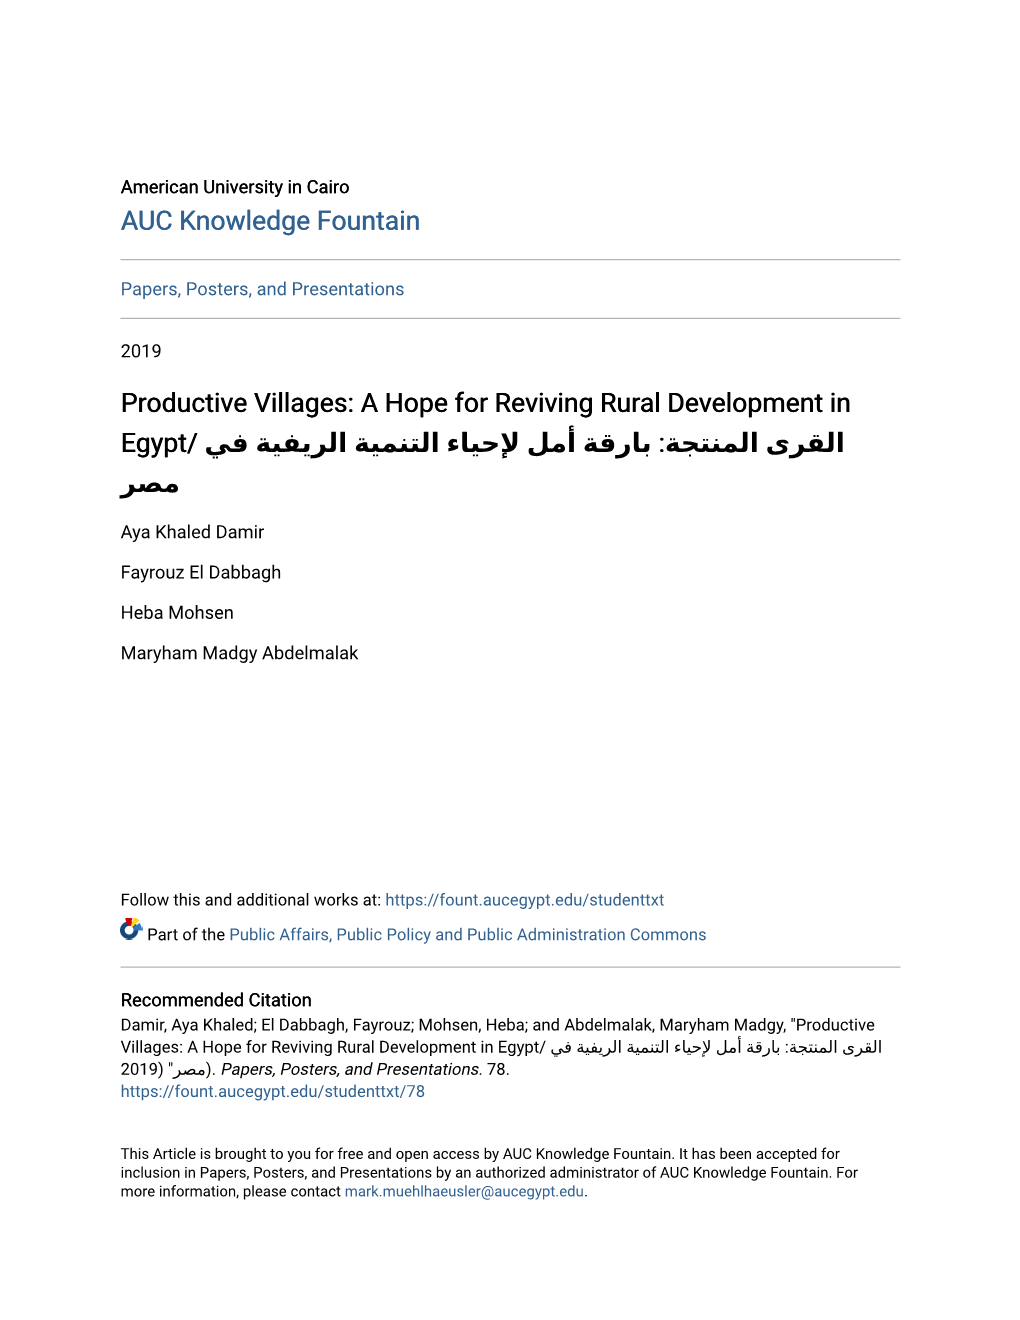 A Hope for Reviving Rural Development in Egypt .Papers, Posters, and Presentations